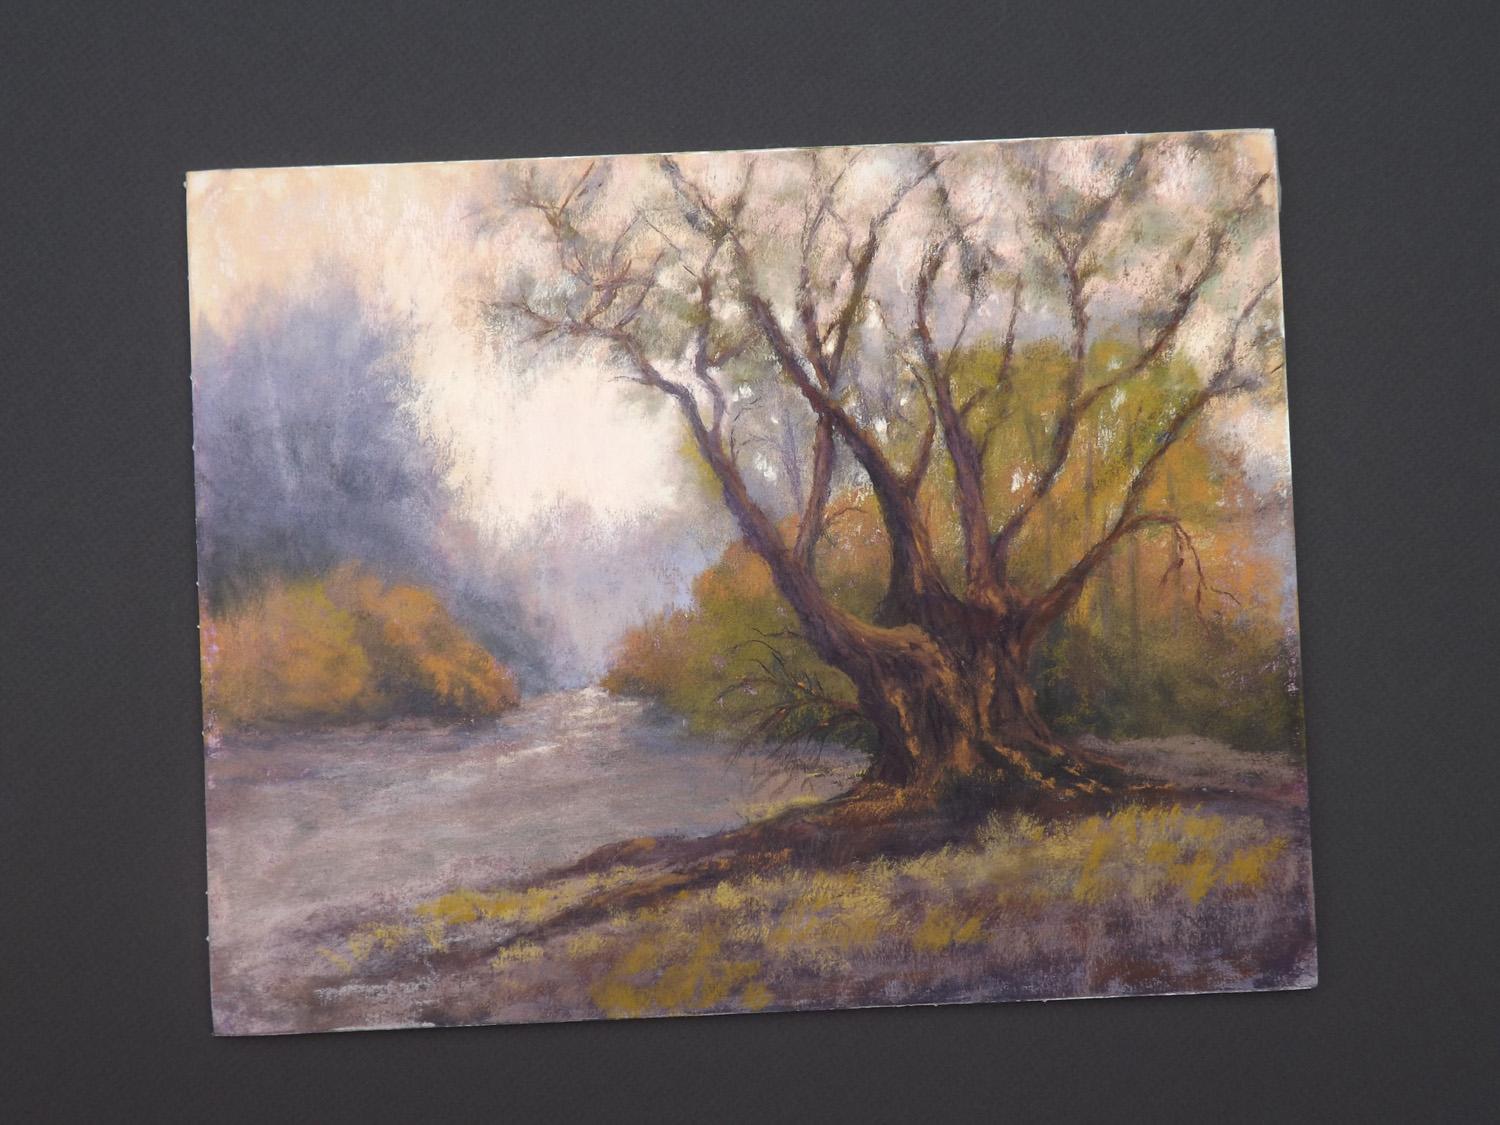 <p>Artist Comments<br />This is a rendering of one of my favorite trees. It has such character and sits by itself in a riverbed that is dry most of the year. I wanted to create a moody, atmospheric scene to surround the strength of this tree, so I